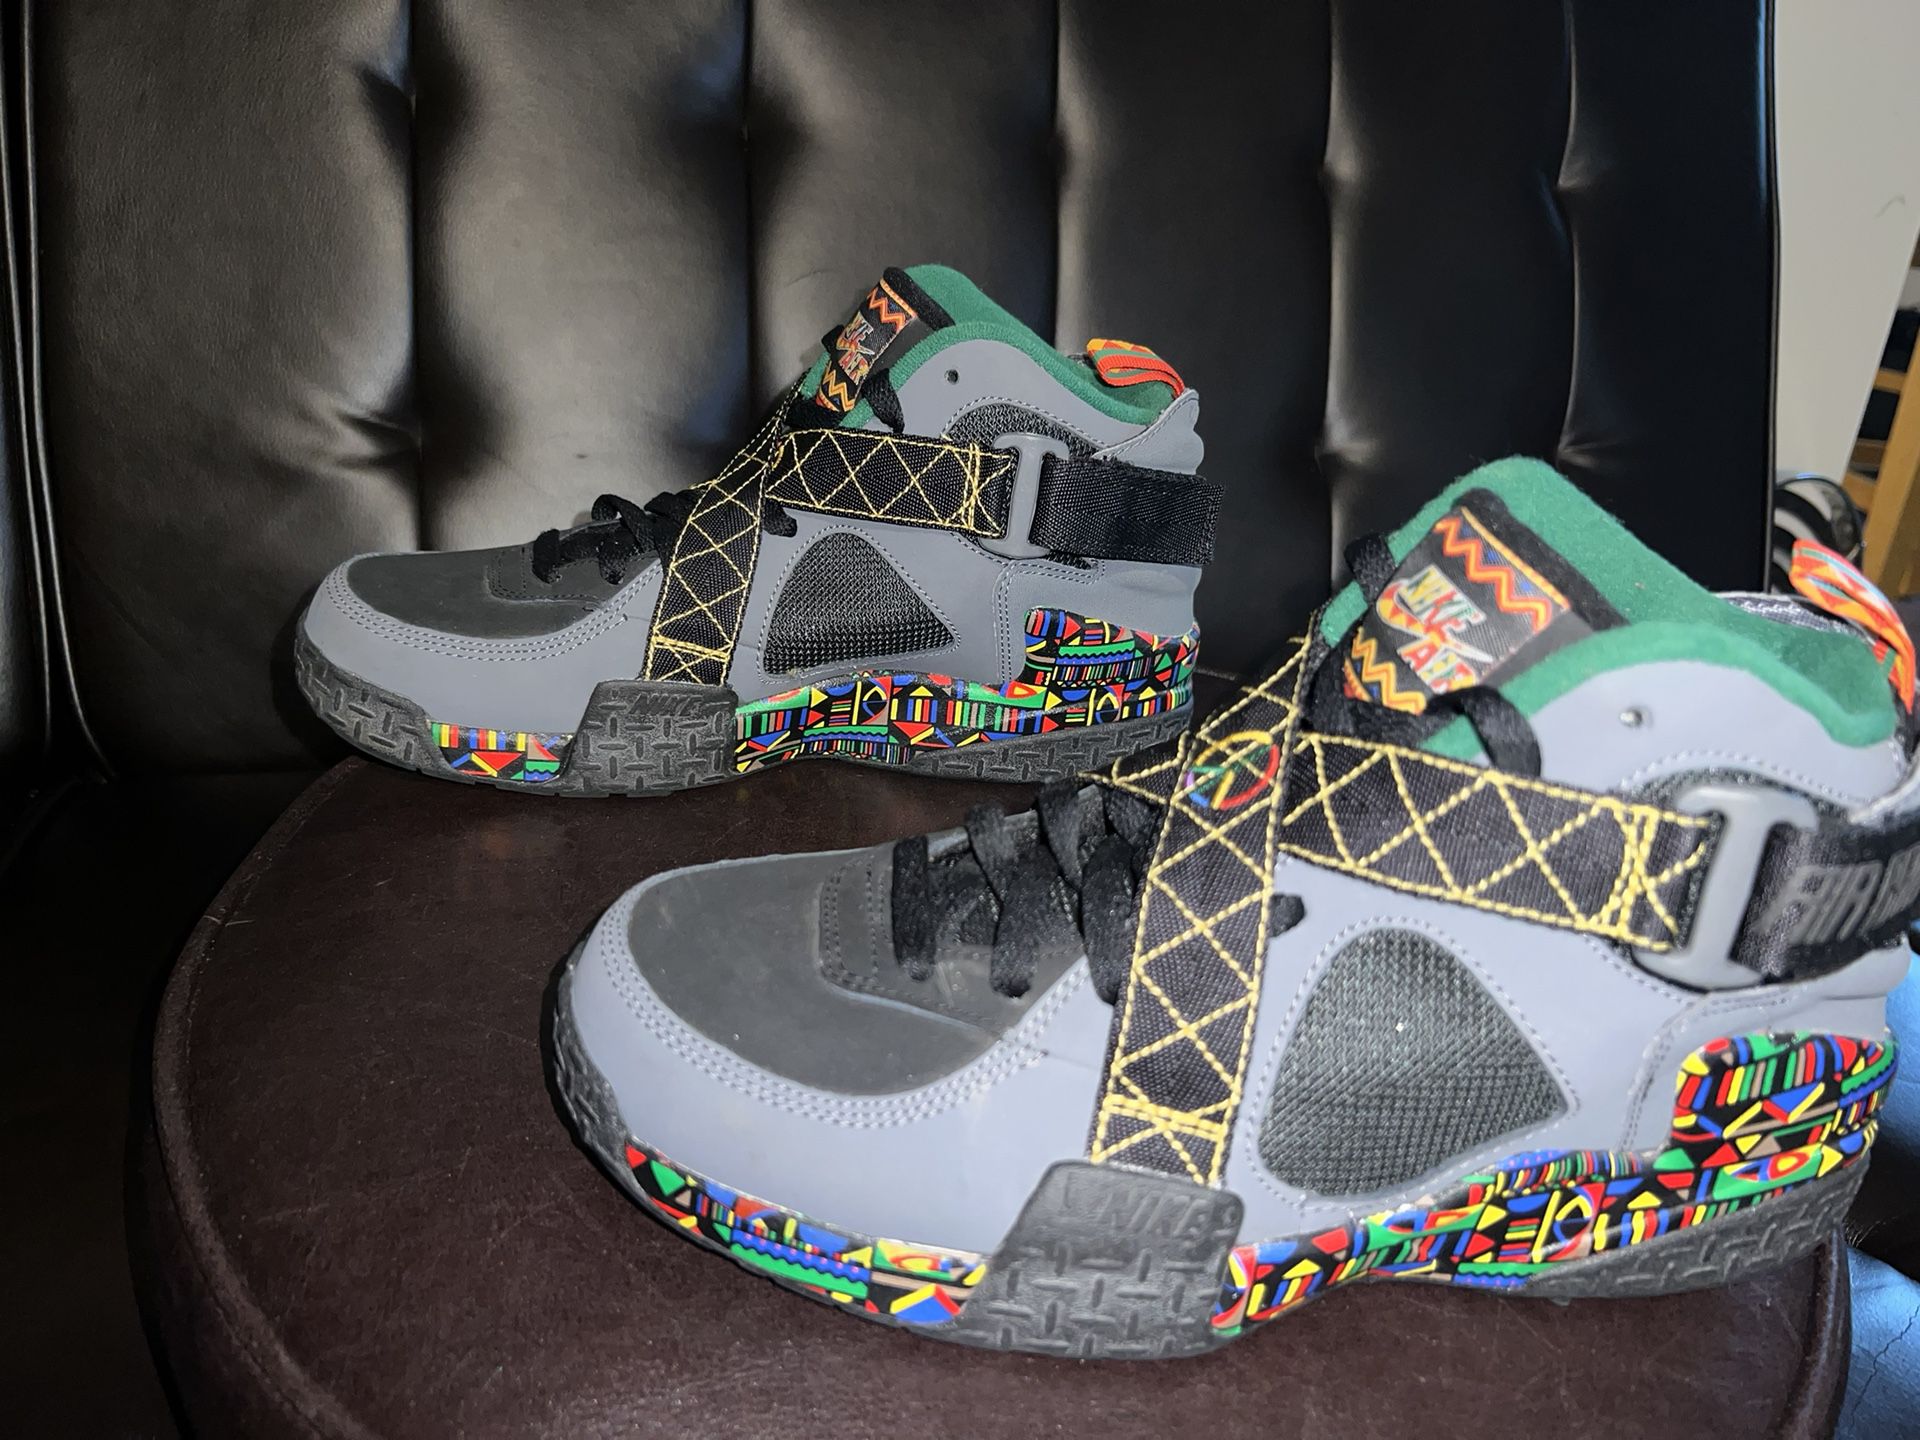 Nike Air Raid for Sale in South Norfolk, VA - OfferUp